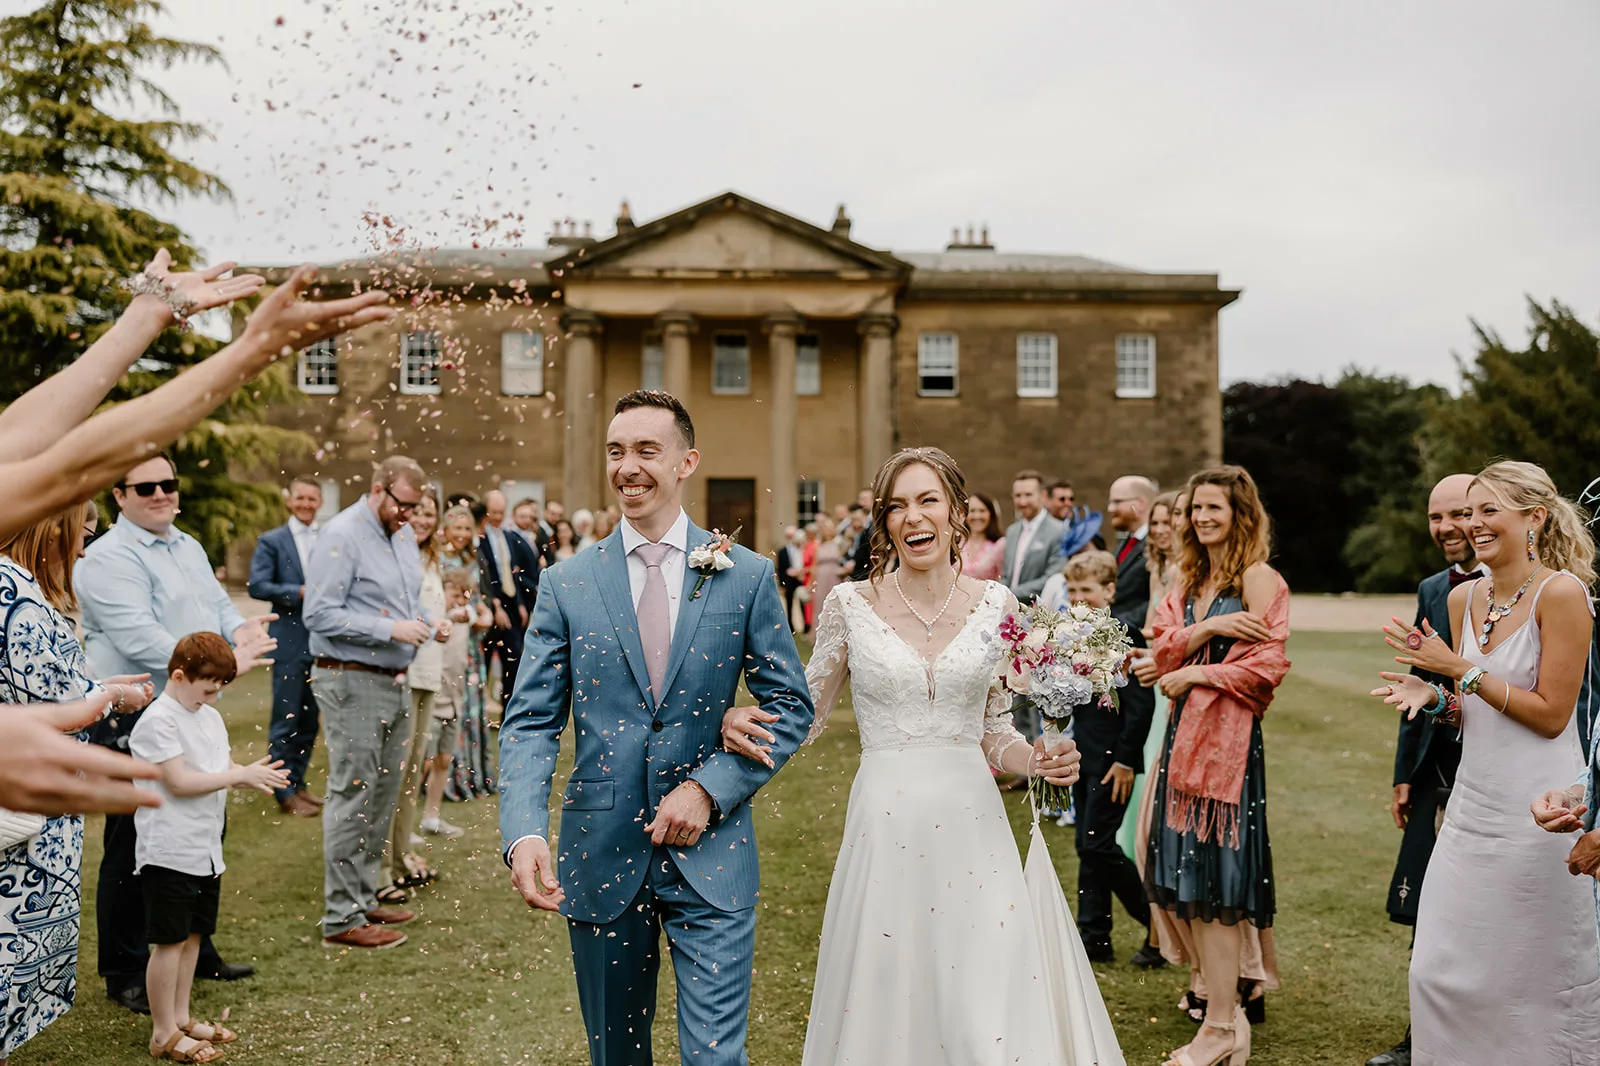 Dine Venues | Rise Hall | Summer wedding in Yorkshire | Stately home wedding venue | White wedding | Confetti